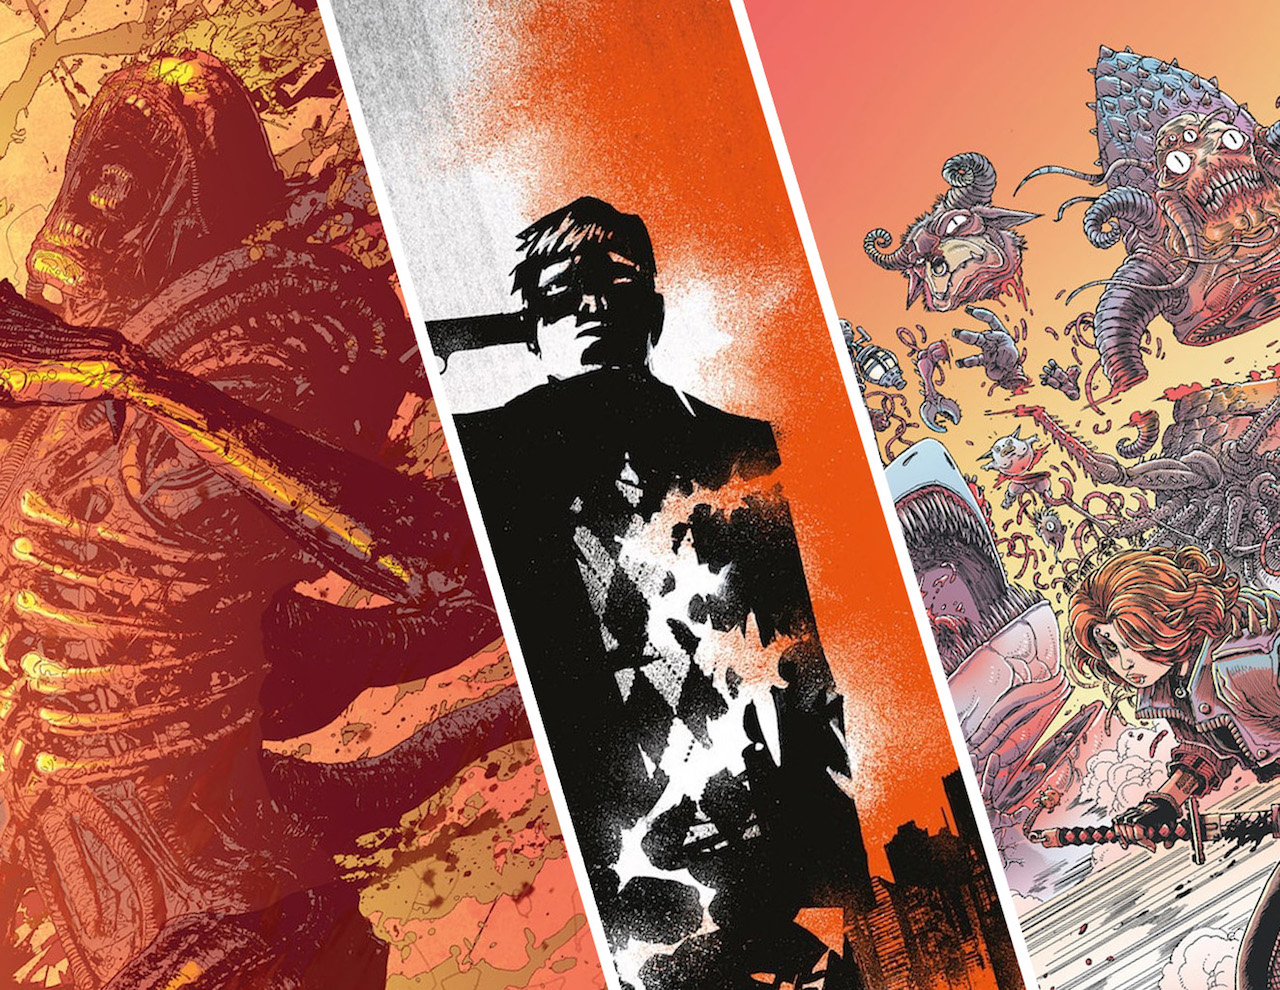 EXCLUSIVE Dark Horse Solicitations: Aliens: Resistance, Wyrd, and Calamity Kate